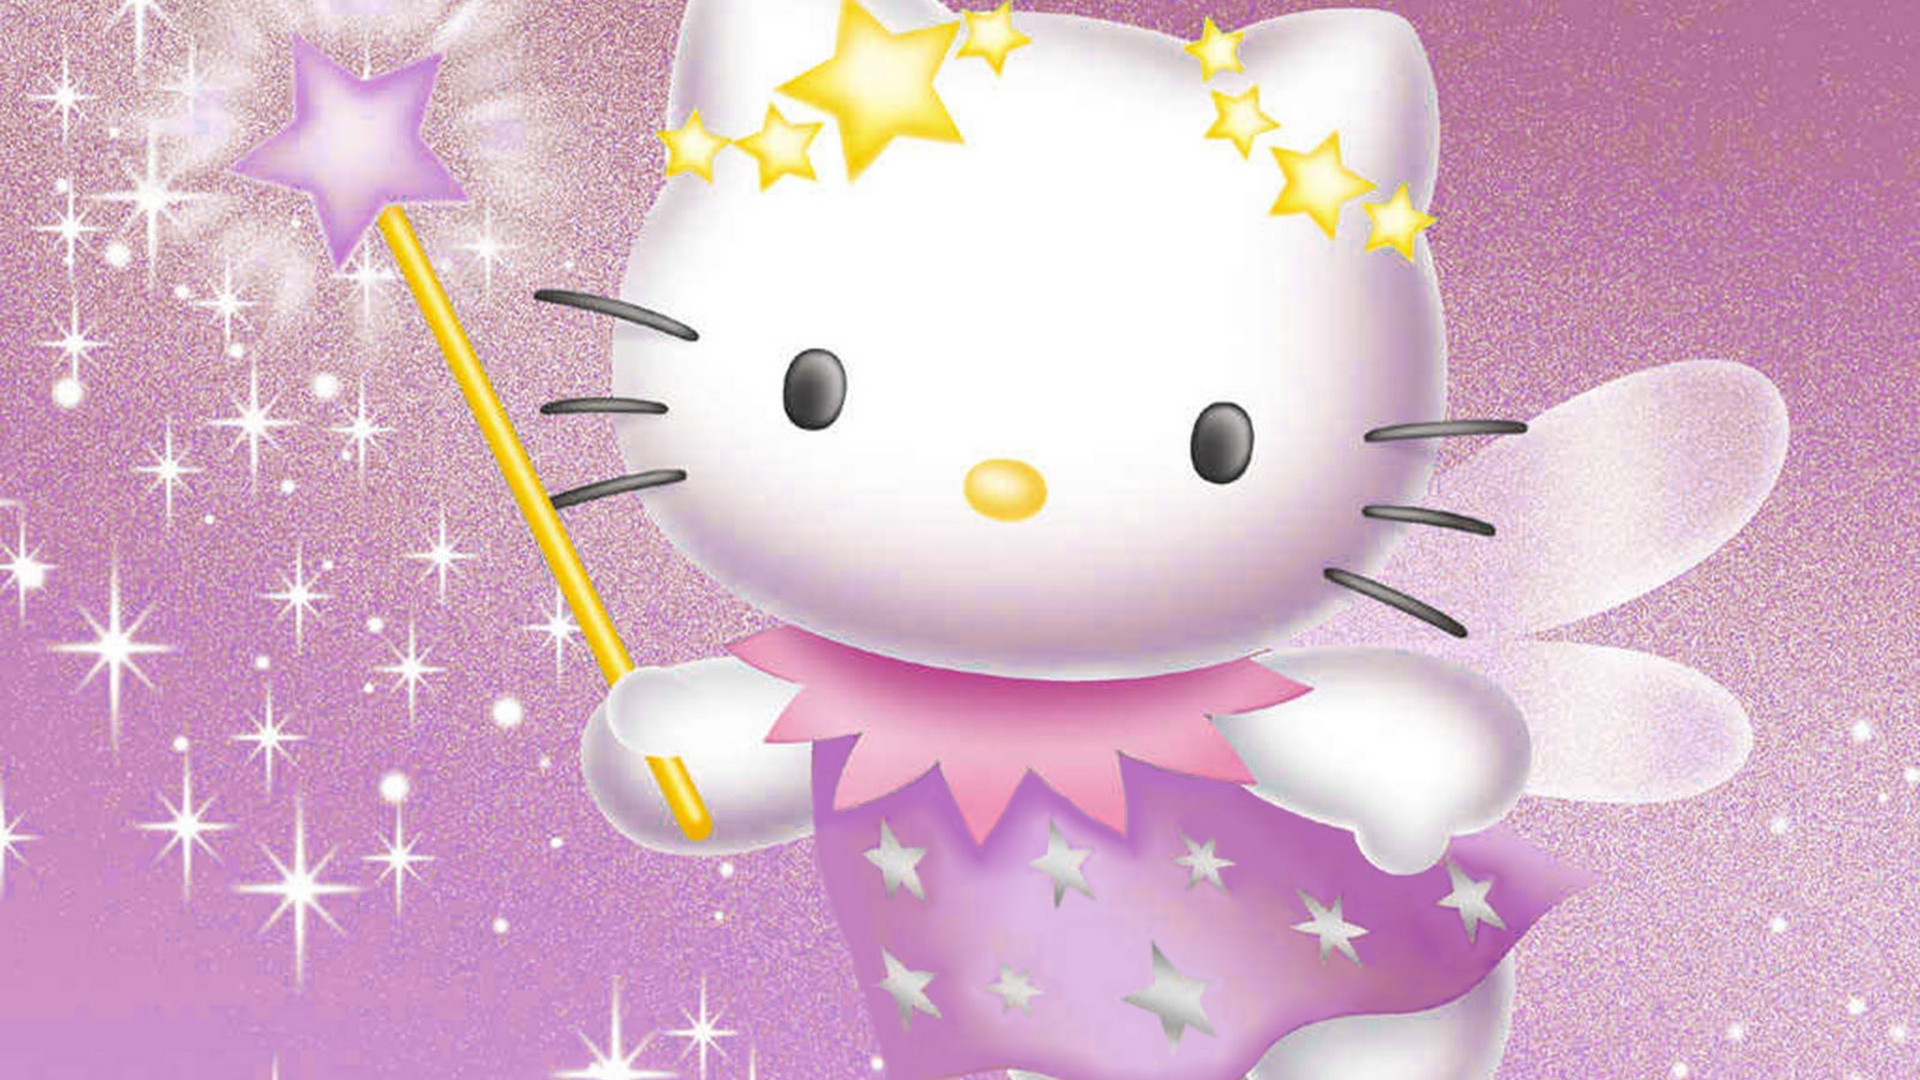 Sanrio Hello Kitty Desktop Backgrounds HD with image resolution 1920x1080 pixel. You can use this wallpaper as background for your desktop Computer Screensavers, Android or iPhone smartphones